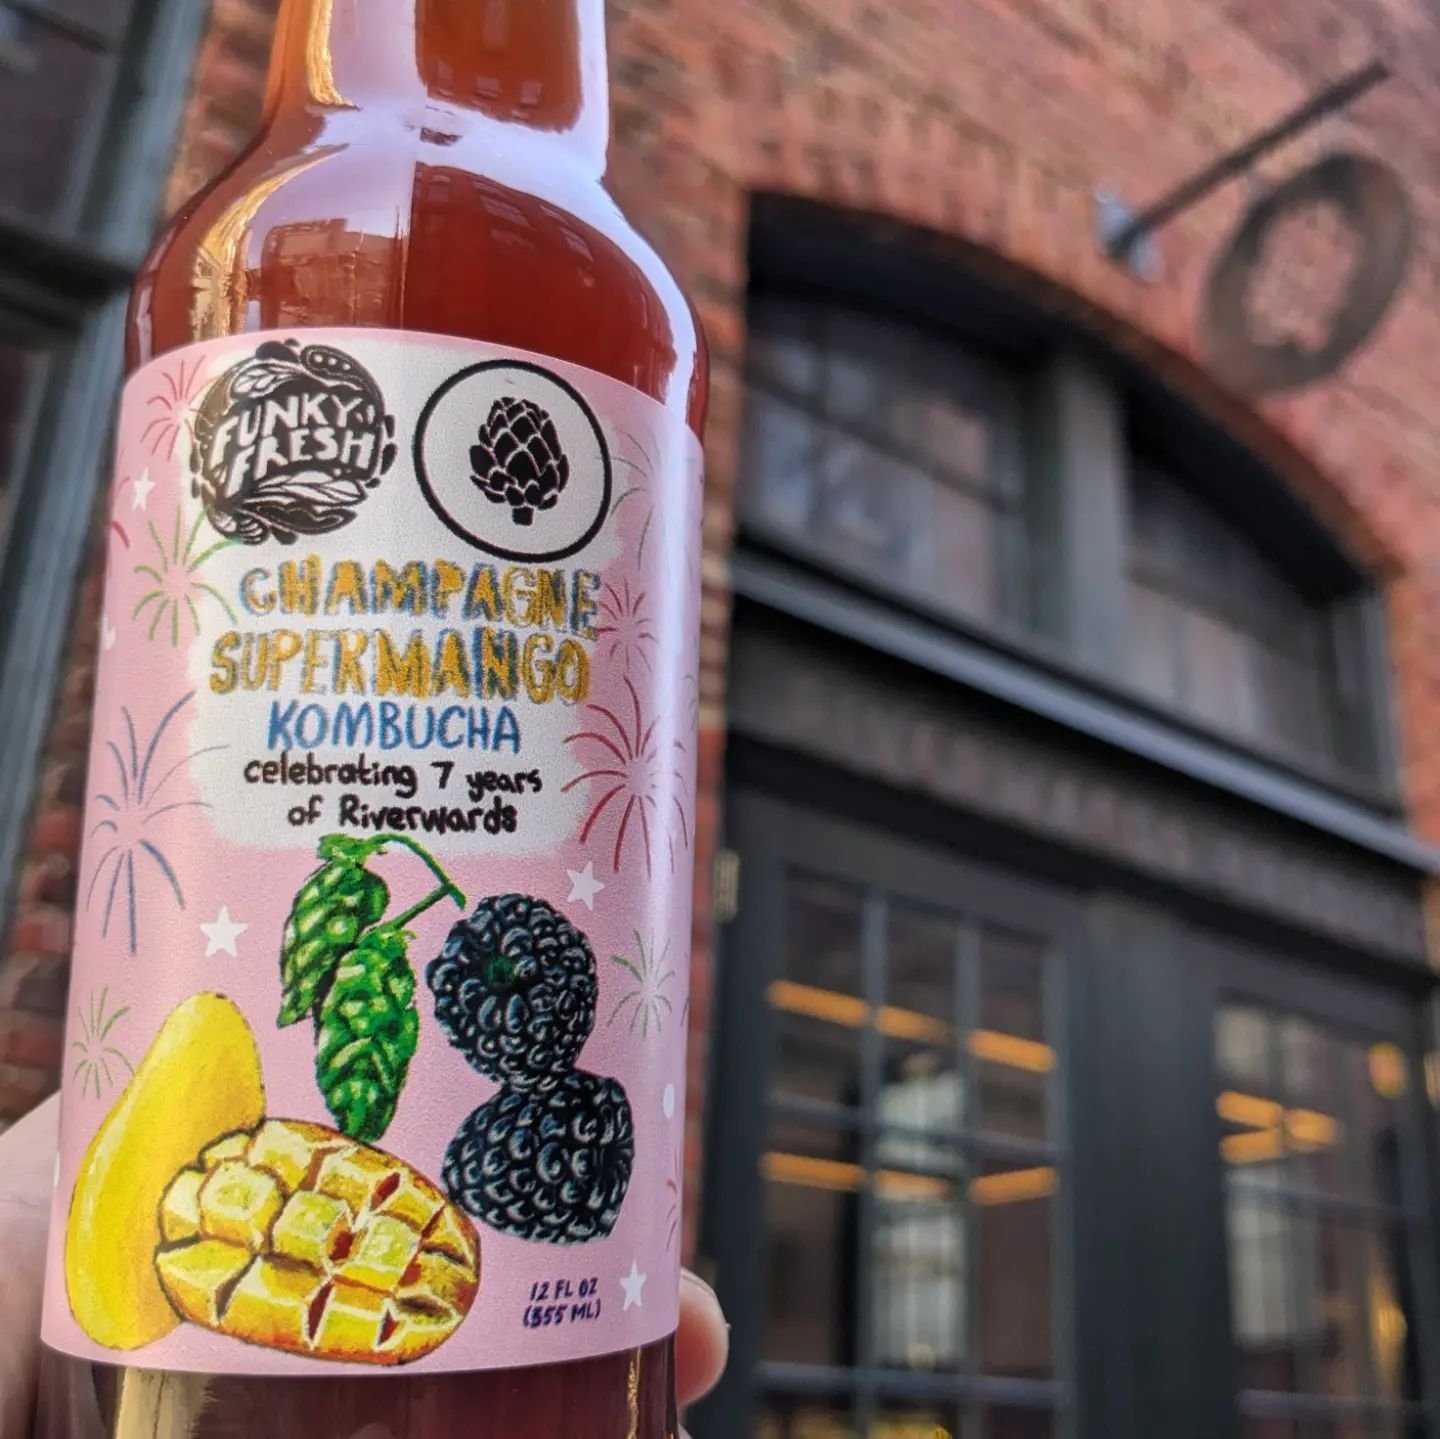 Happy birthday @riverwardsproduce!!! To celebrate 7 amazing years we made a special limited release anniversary flavor together! This deluxe booch is available at both locations till it sells out. This luxury booch is adorned with artwork from Riverw